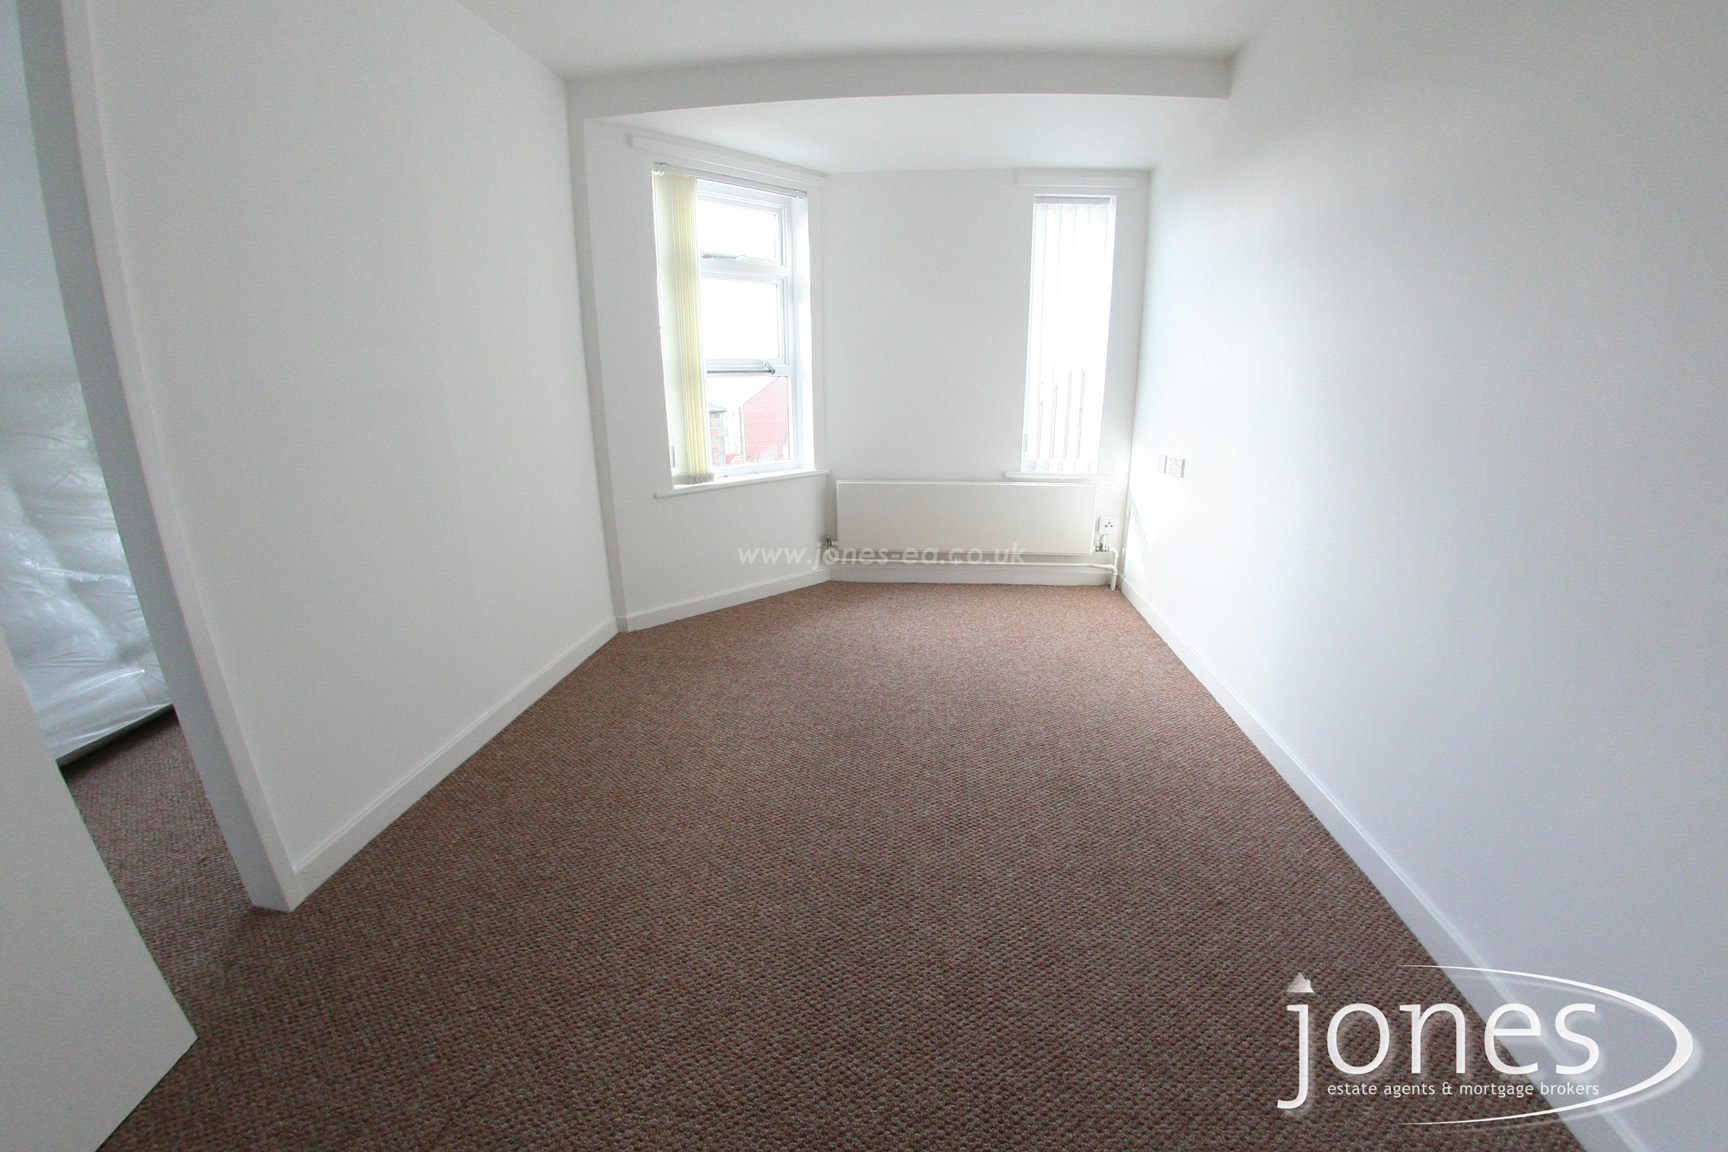 Home for Sale Let - Photo 02 GALLEYSFIELDS COURT,  The Headland, Hartlepool, TS24 0NB